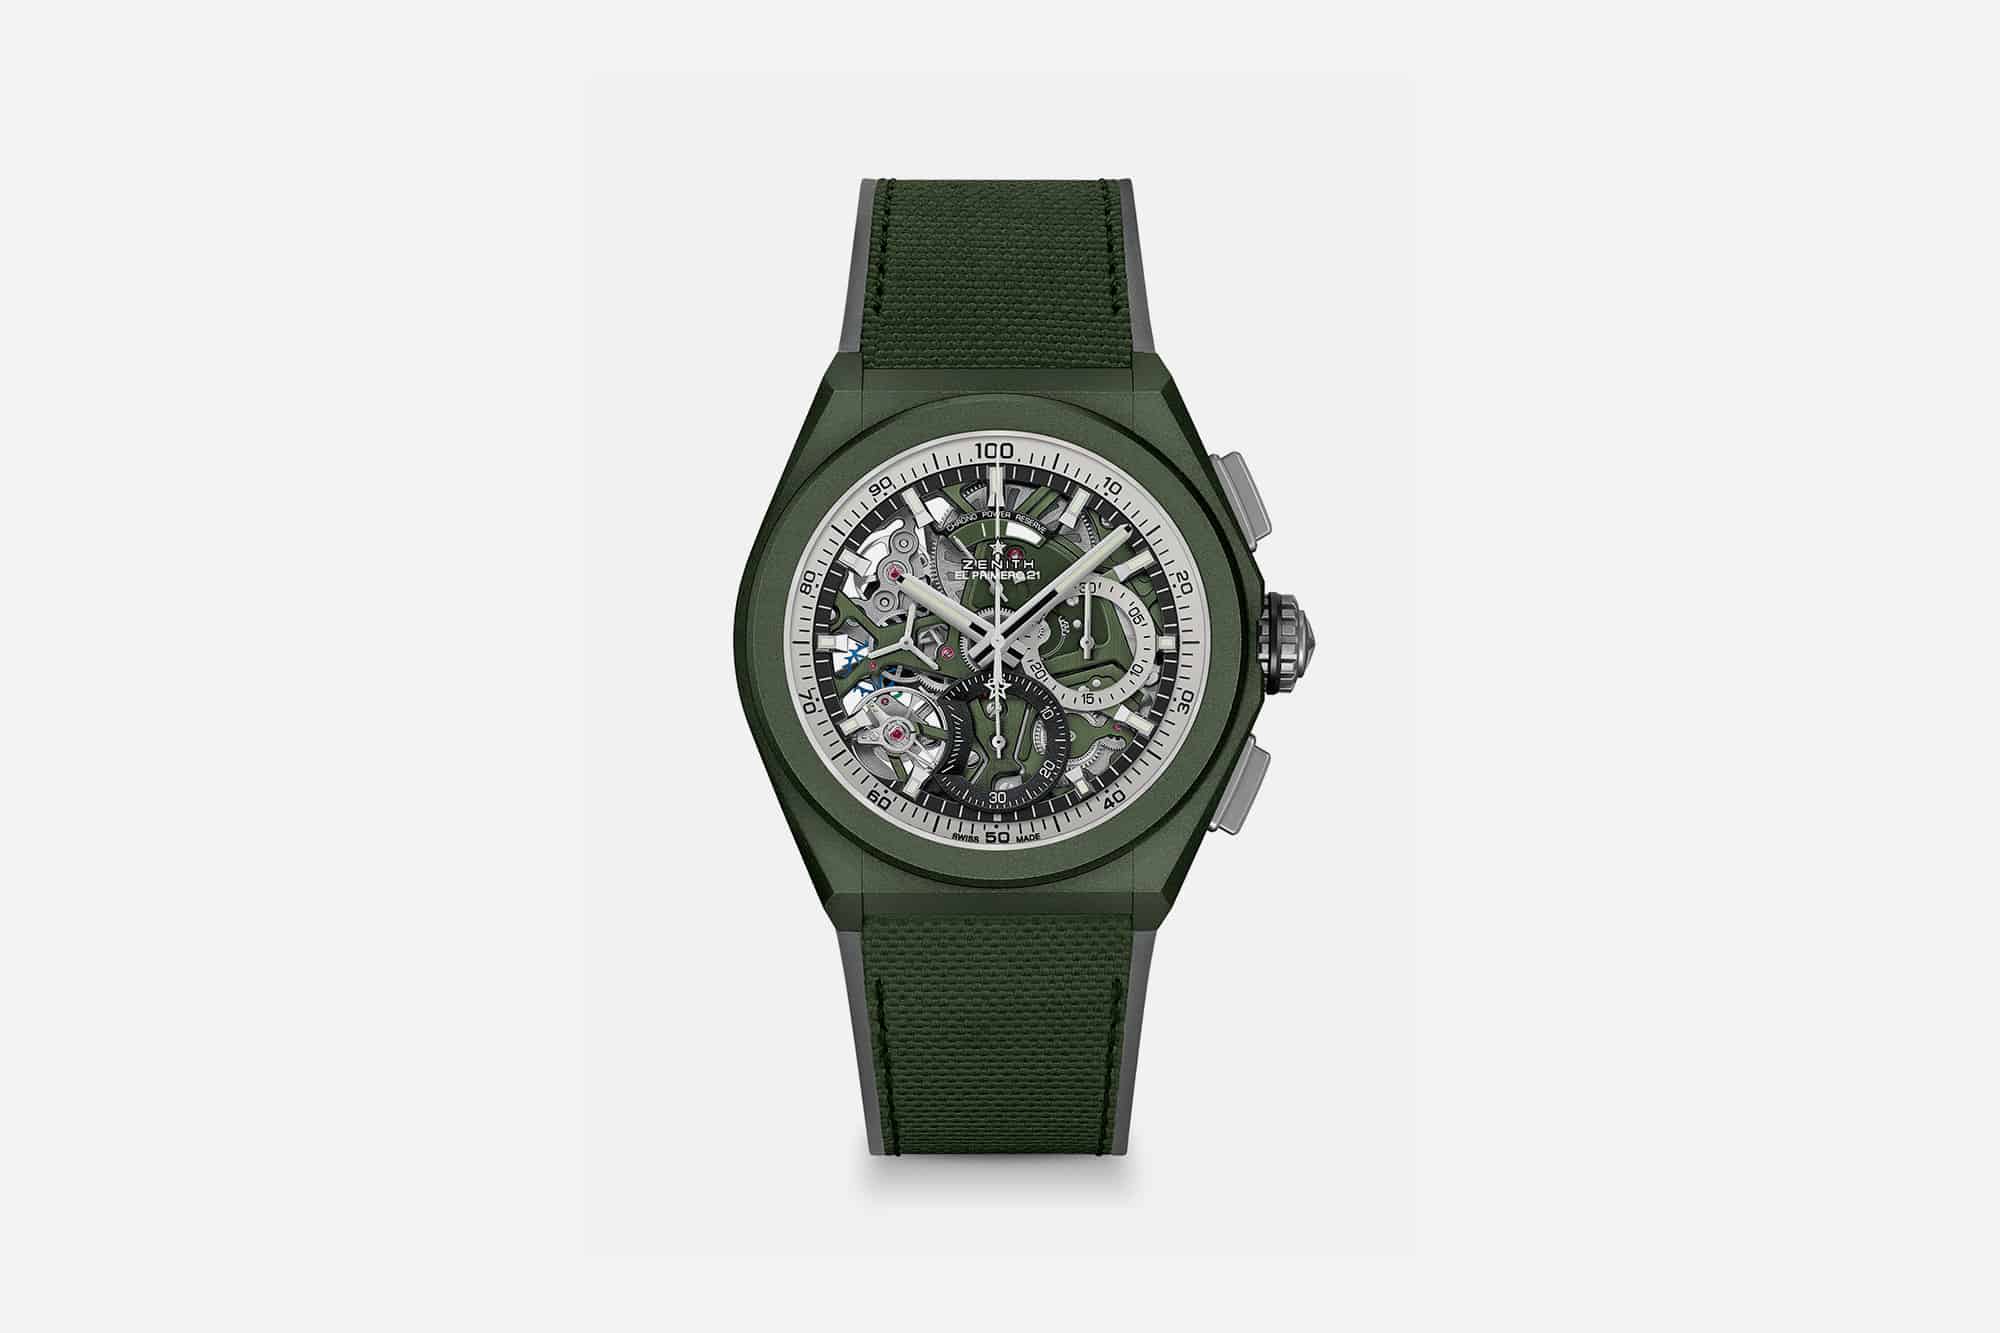 Zenith Introduces a New Defy 21 Chronograph with a Green Ceramic Case